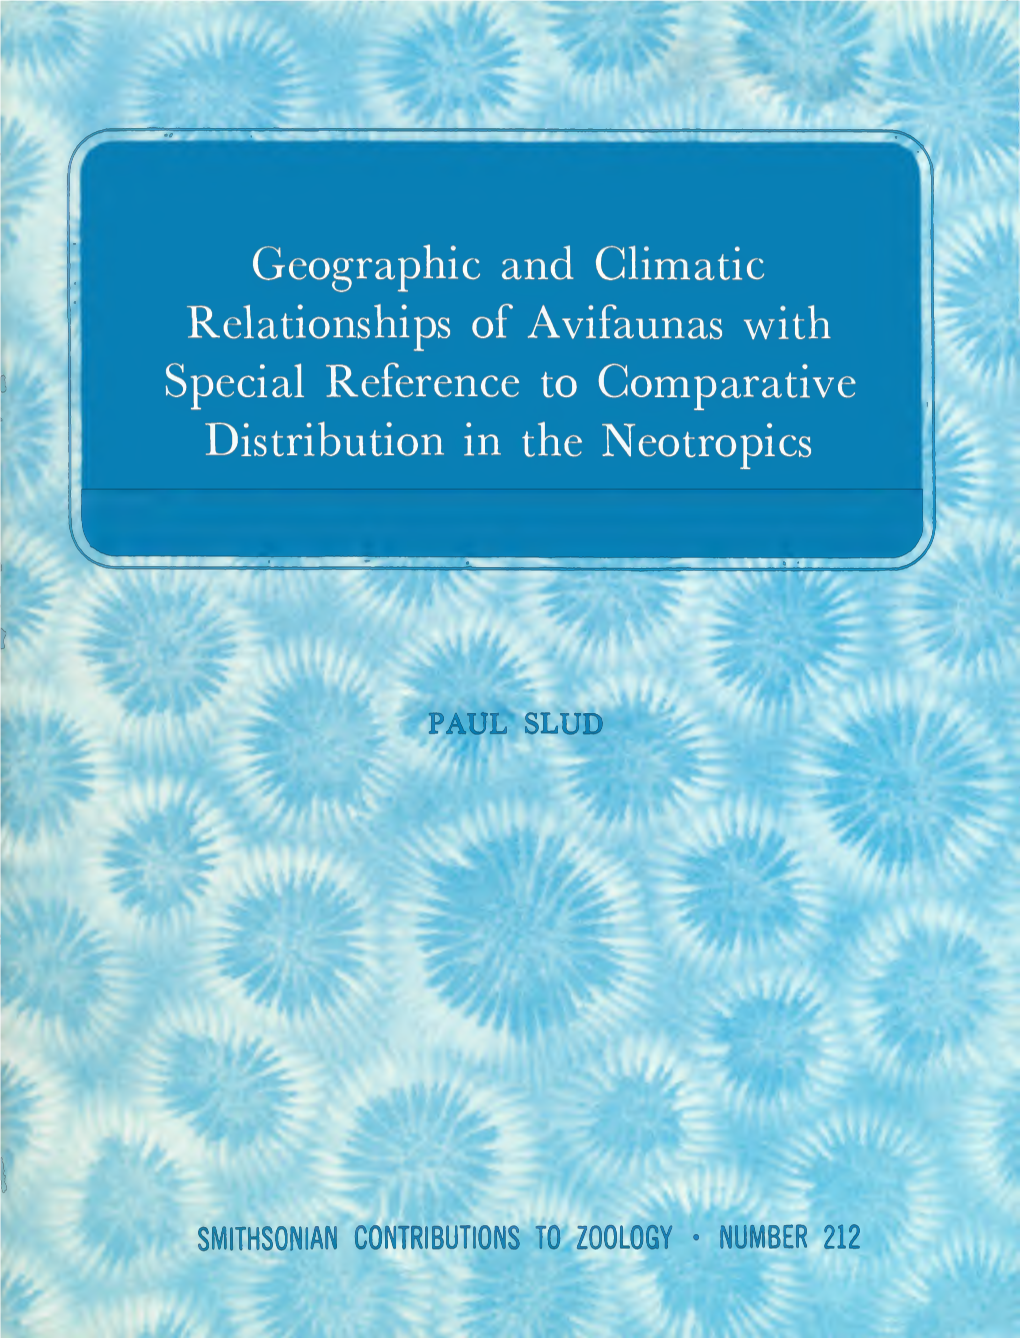 Geographic and Climatic Relationships of Avifaunas with Special Reference to Comparative Distribution in the Neotropics